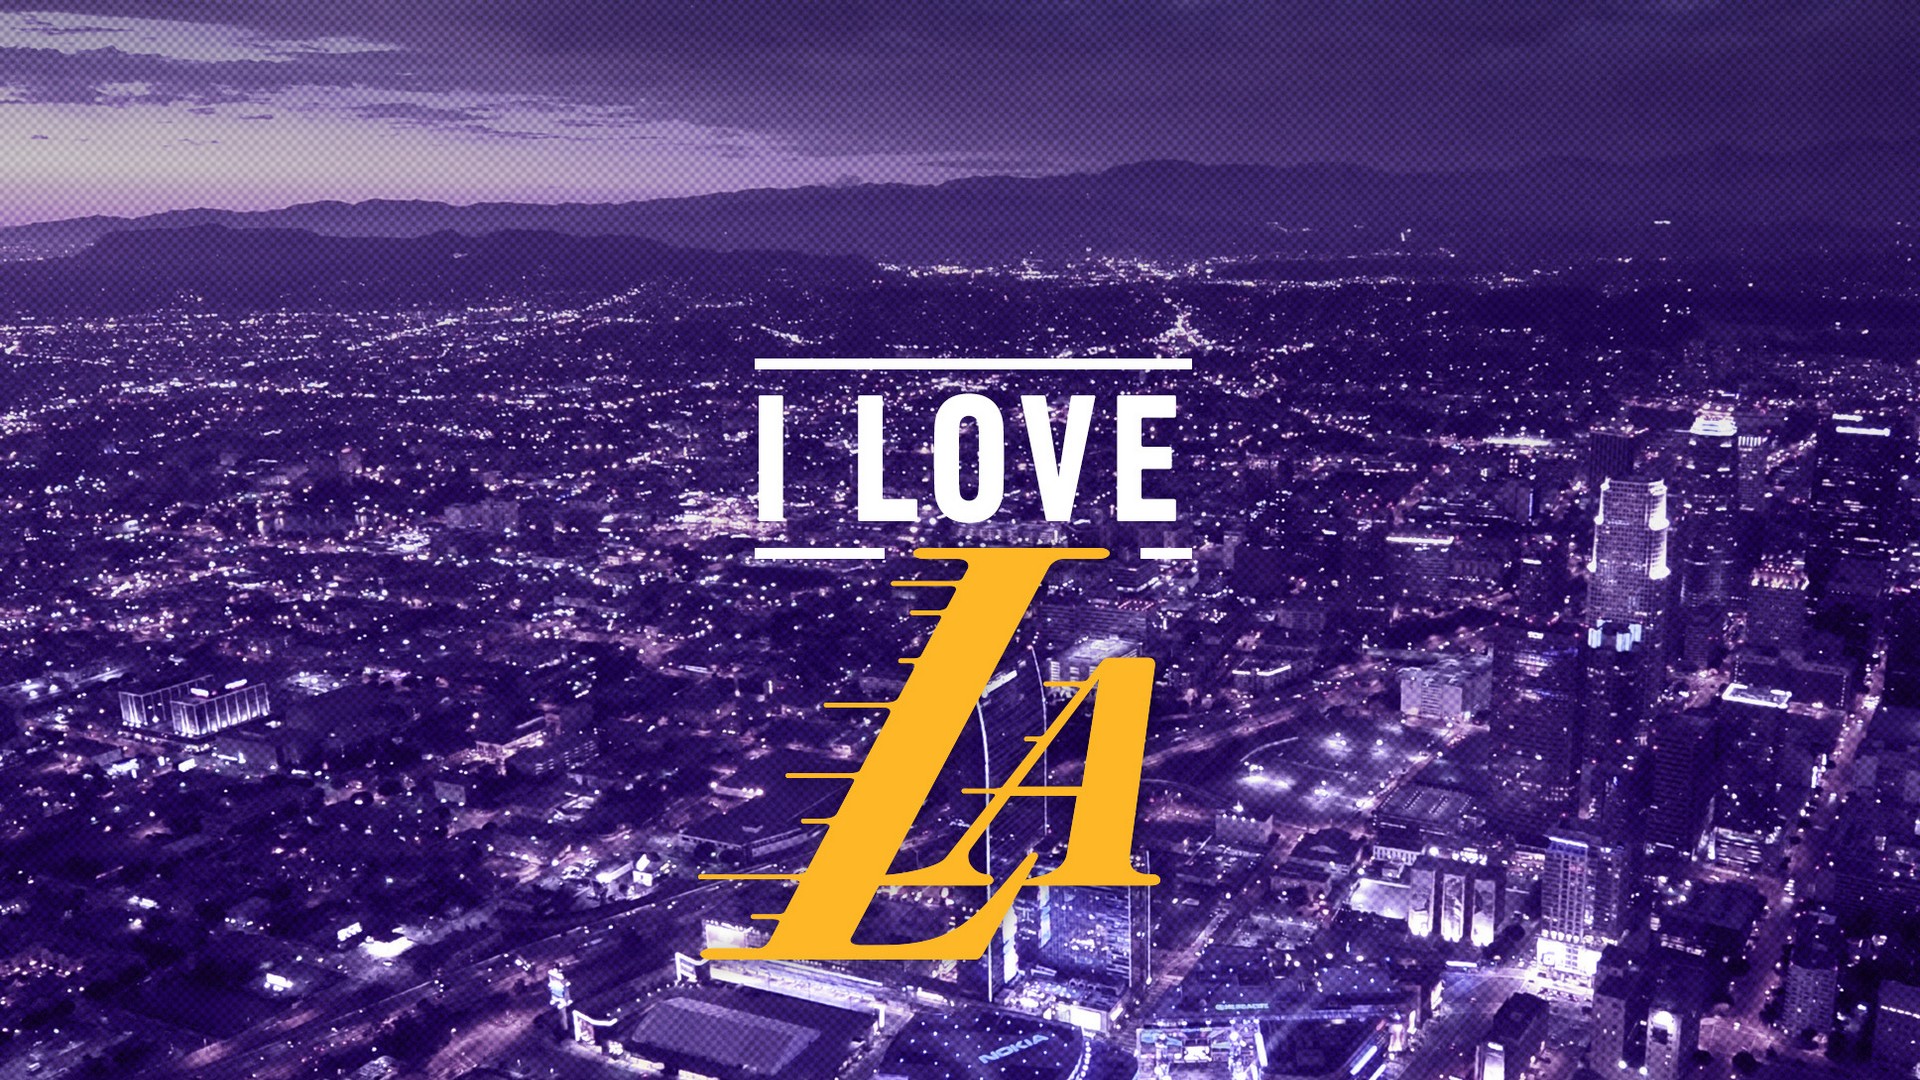 Wallpapers HD LA Lakers with image dimensions 1920x1080 pixel. You can make this wallpaper for your Desktop Computer Backgrounds, Windows or Mac Screensavers, iPhone Lock screen, Tablet or Android and another Mobile Phone device